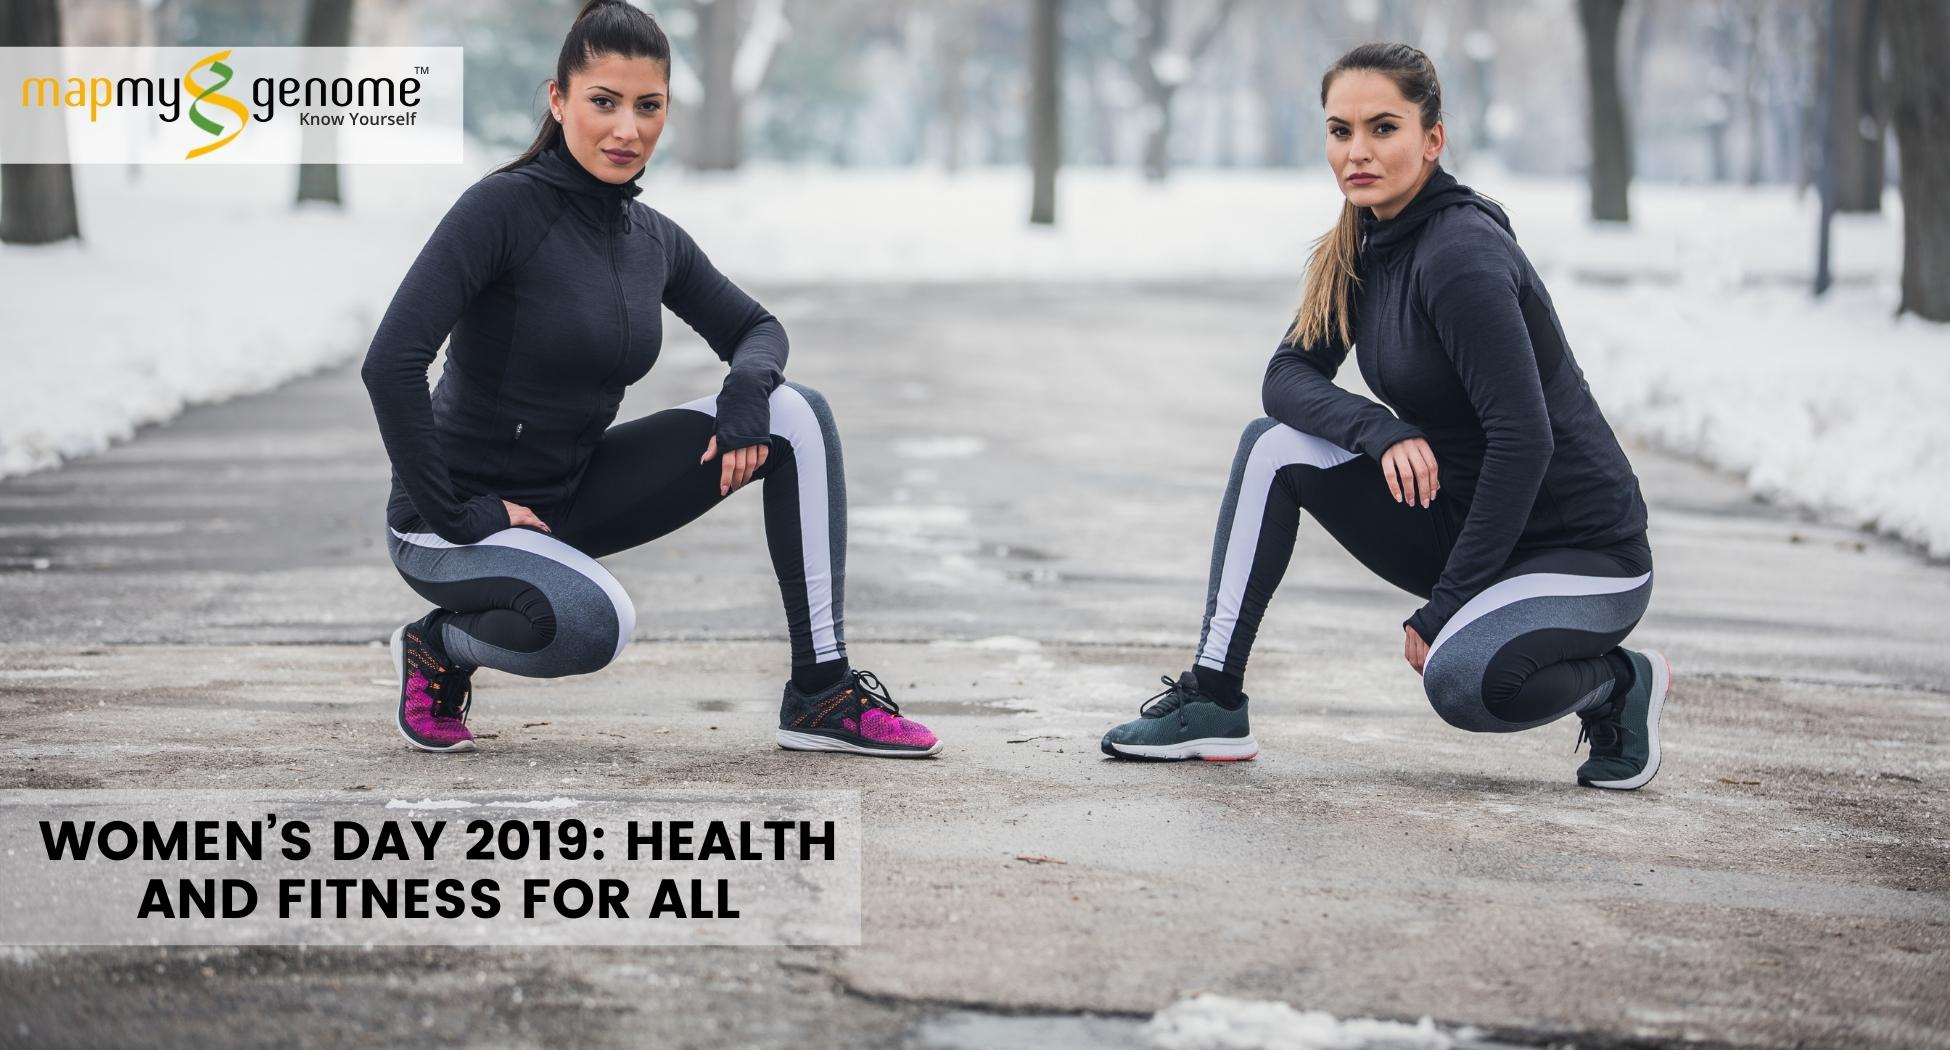 Women’s Day 2019: Health and Fitness for All